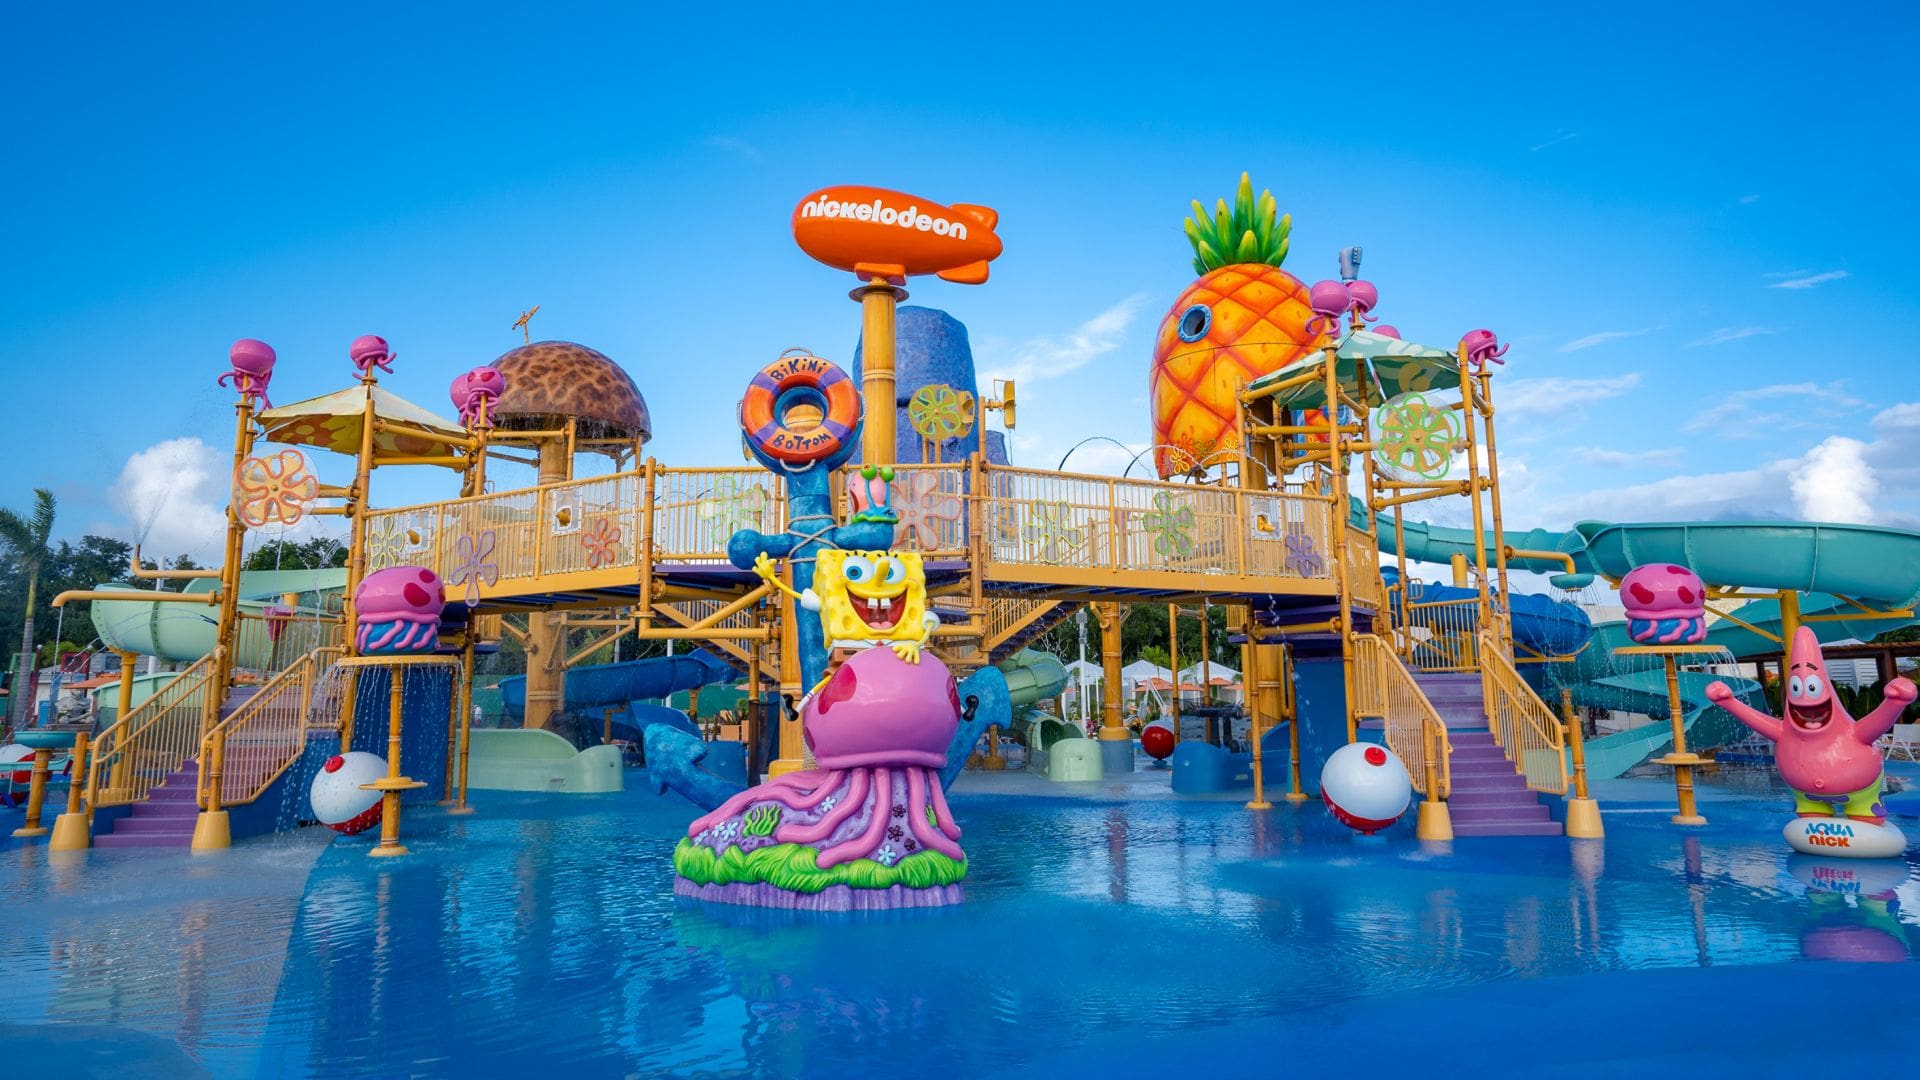 The Nickelodeon-themed water park at Nickelodeon Hotels & Resorts Riviera Maya, featuring kid favorites like Sponge Bob at one of the best resorts in Mexico with a water park for families.